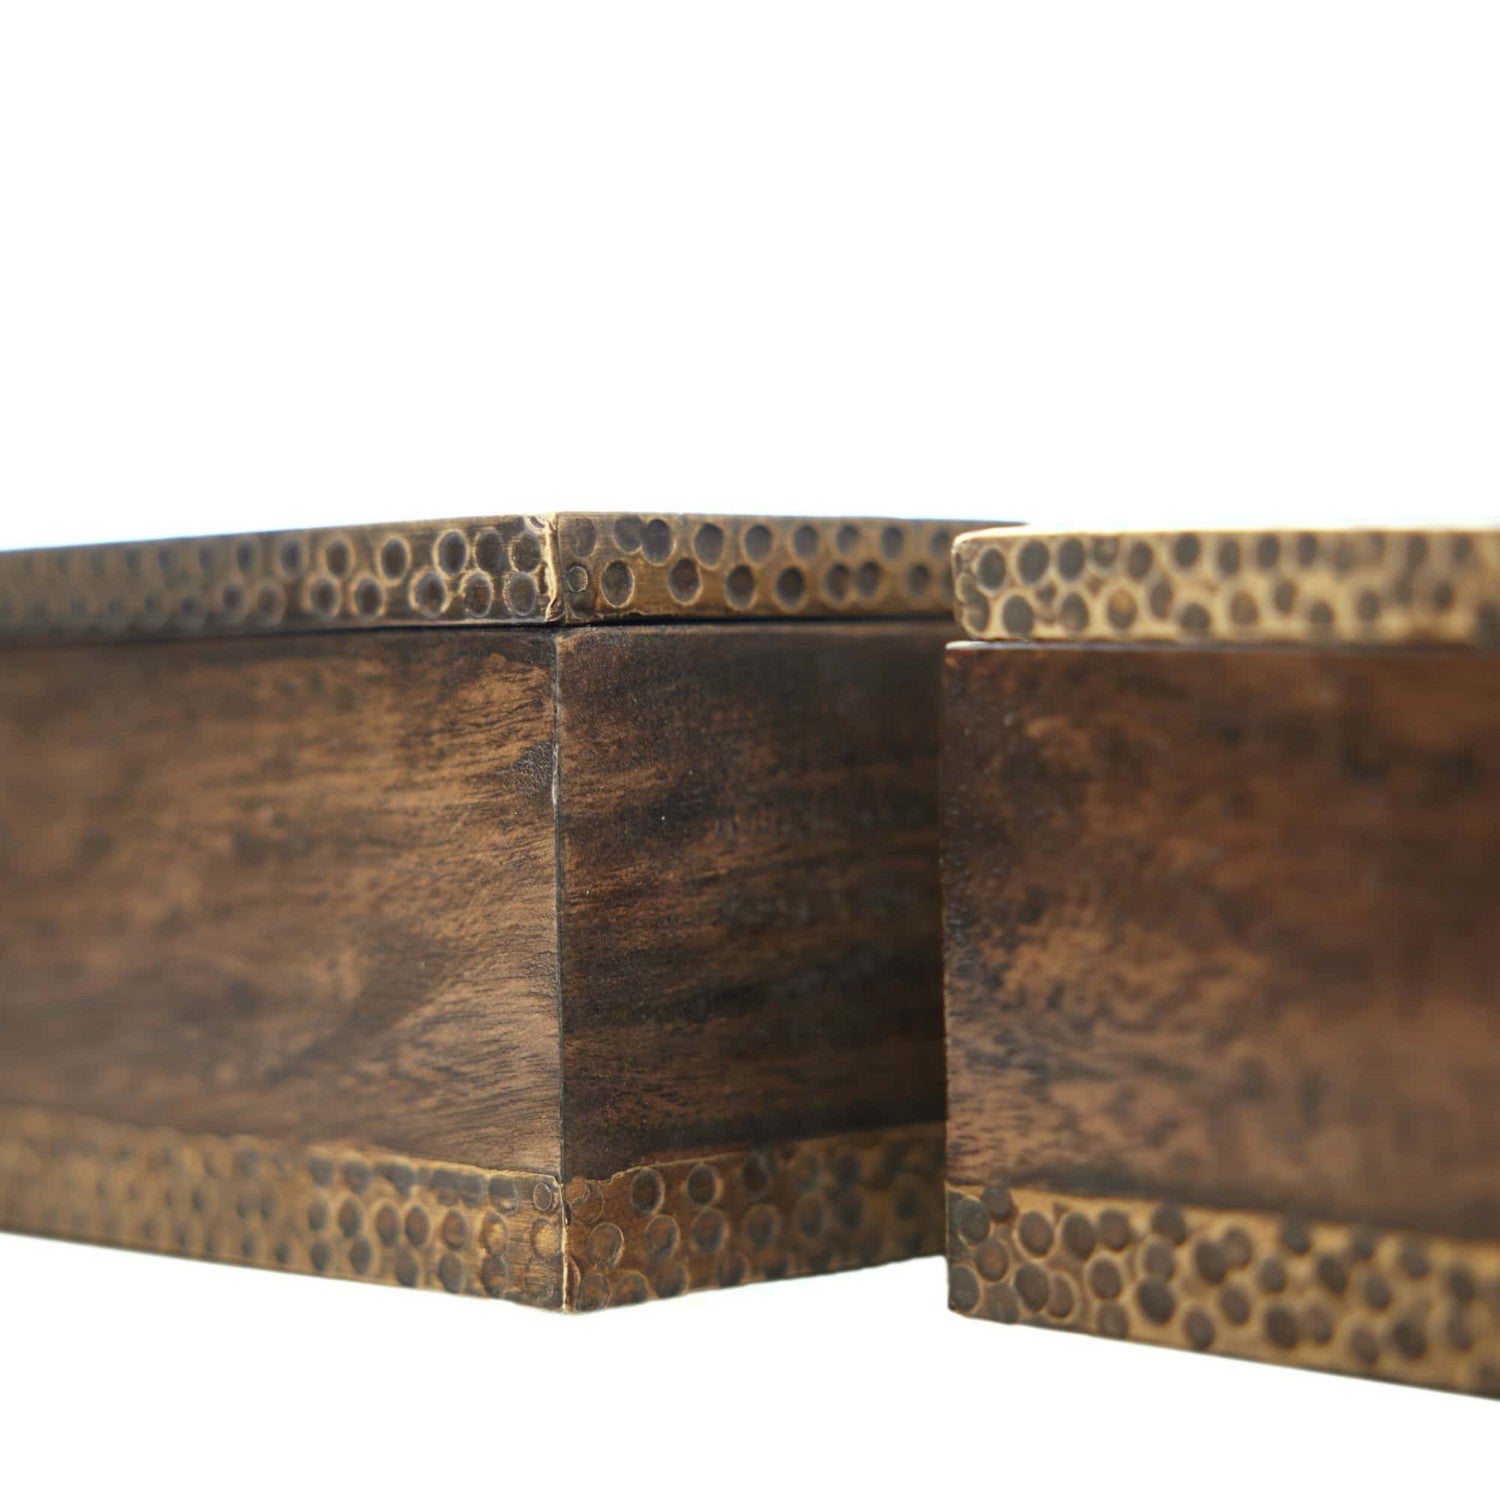 Boxes, Set of 2 from the Turney collection in Dark Walnut finish